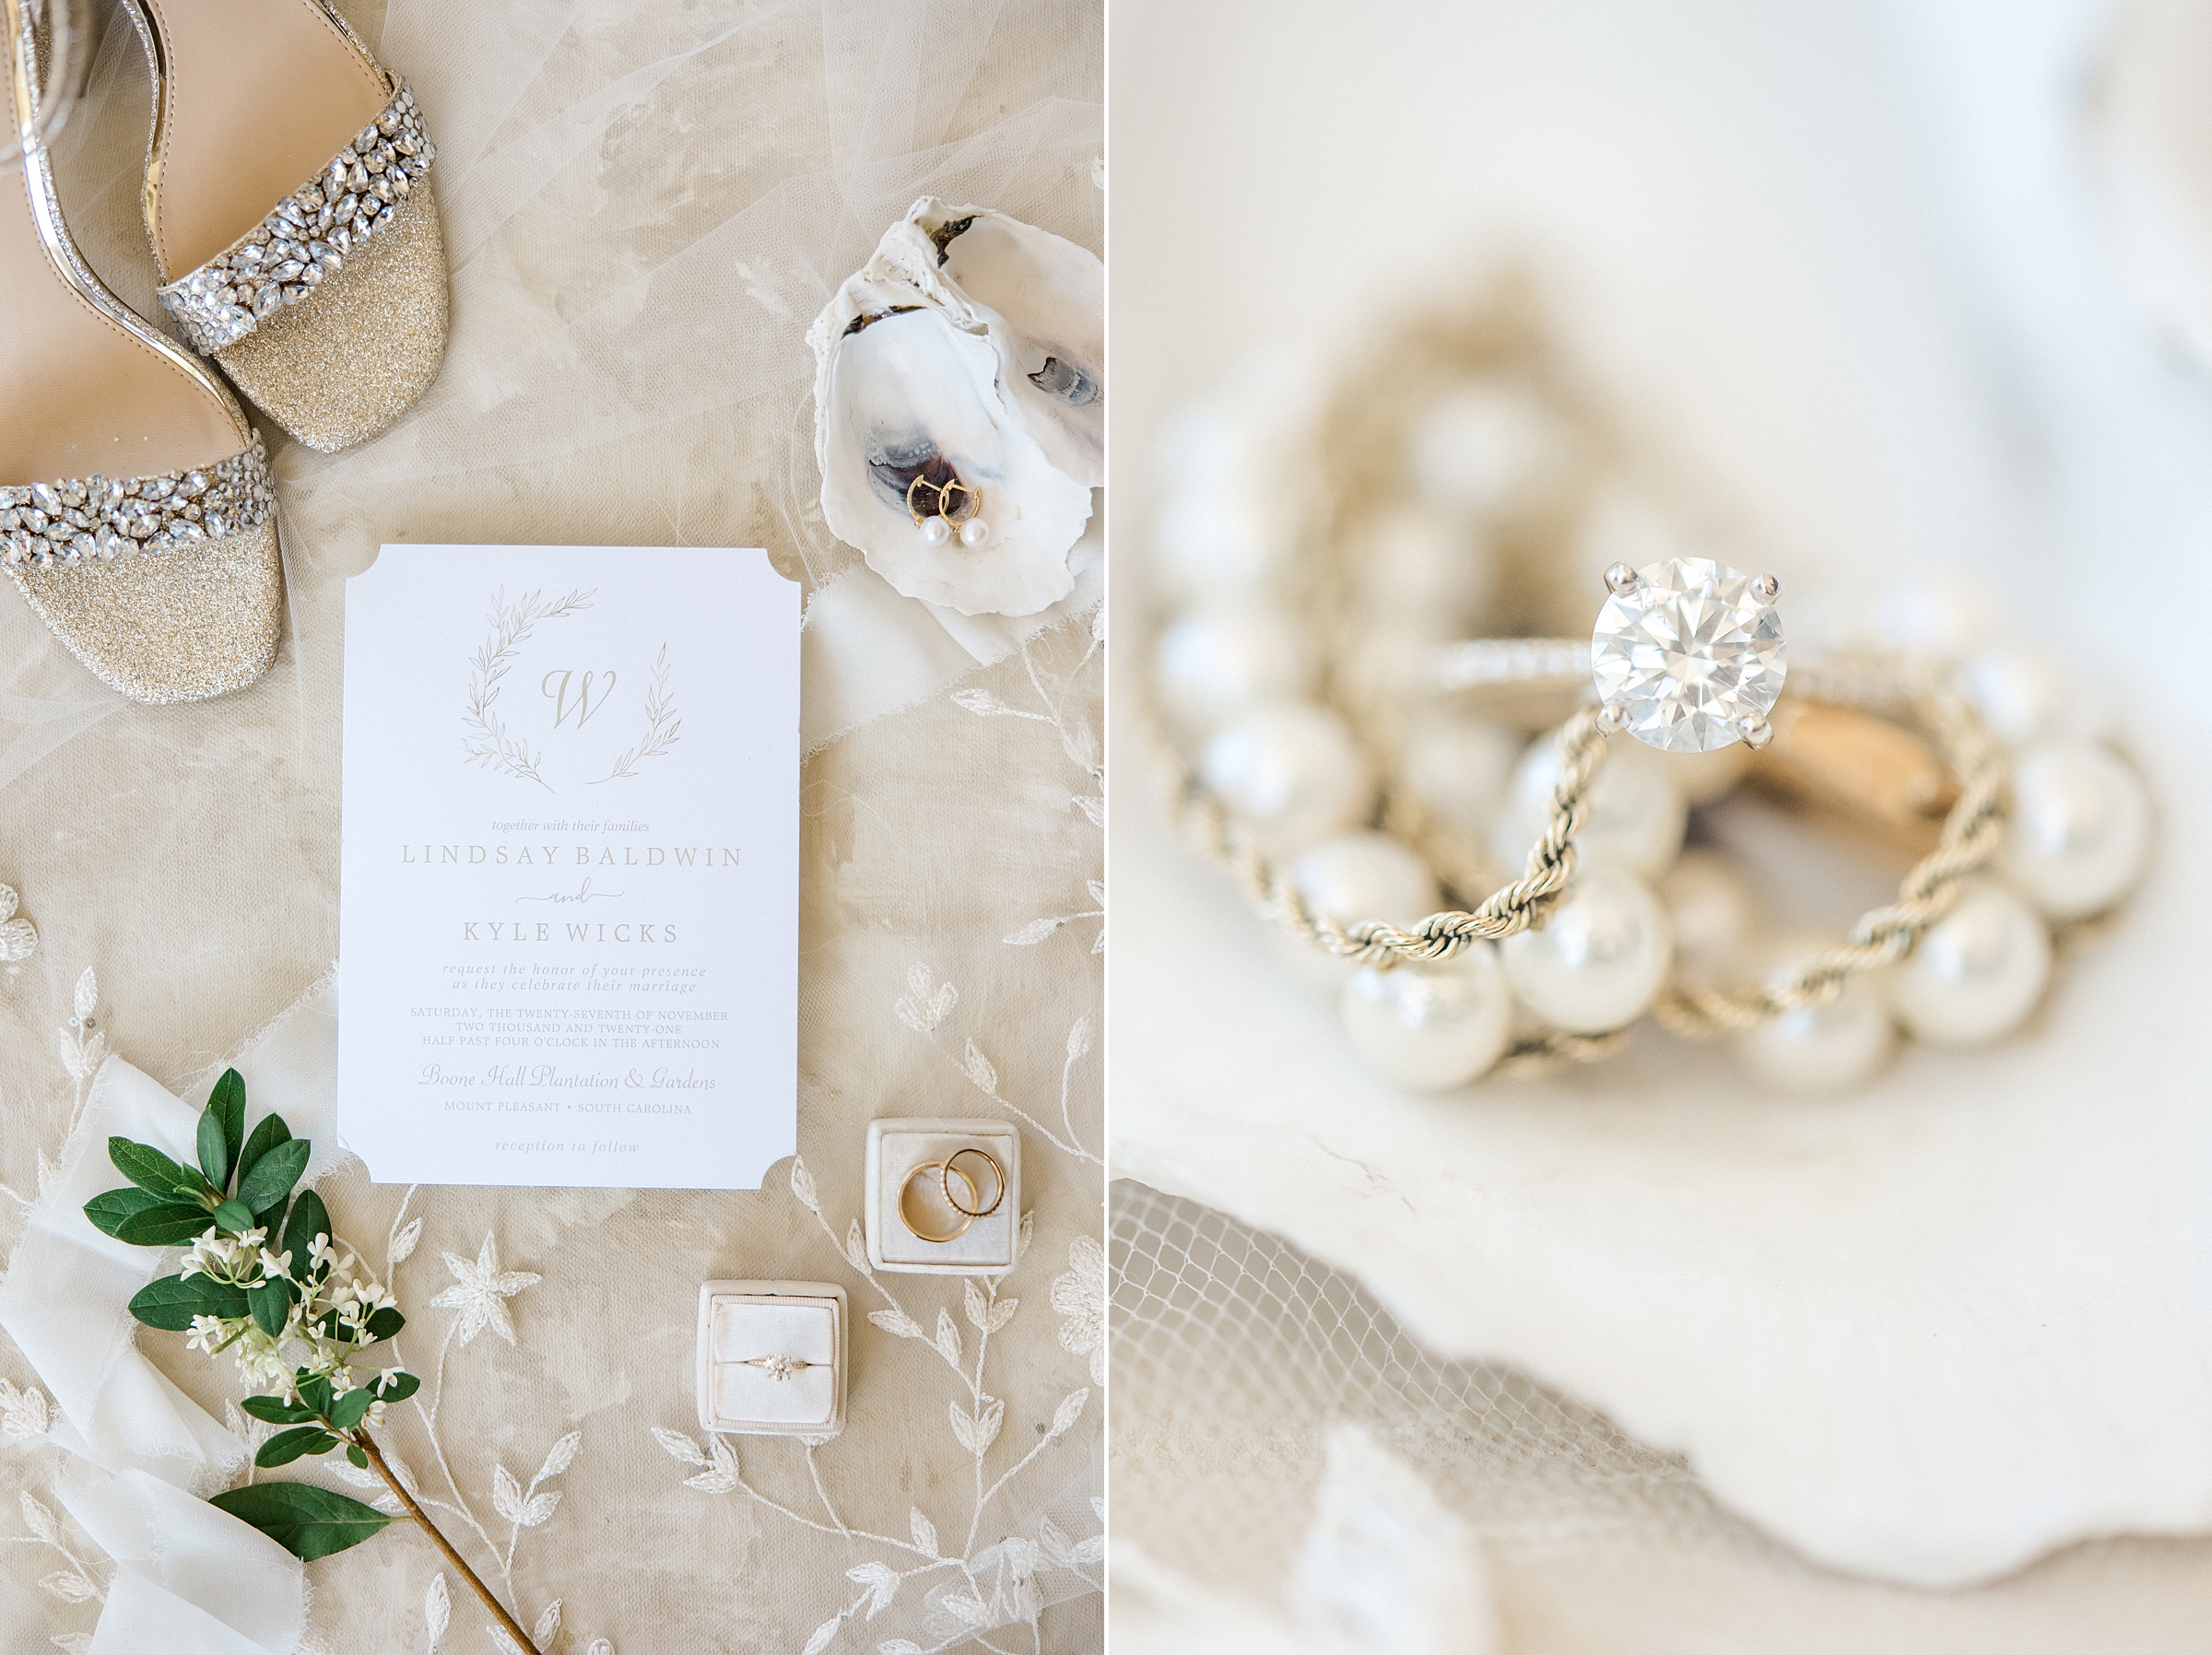 Bride's wedding day jewelry and details